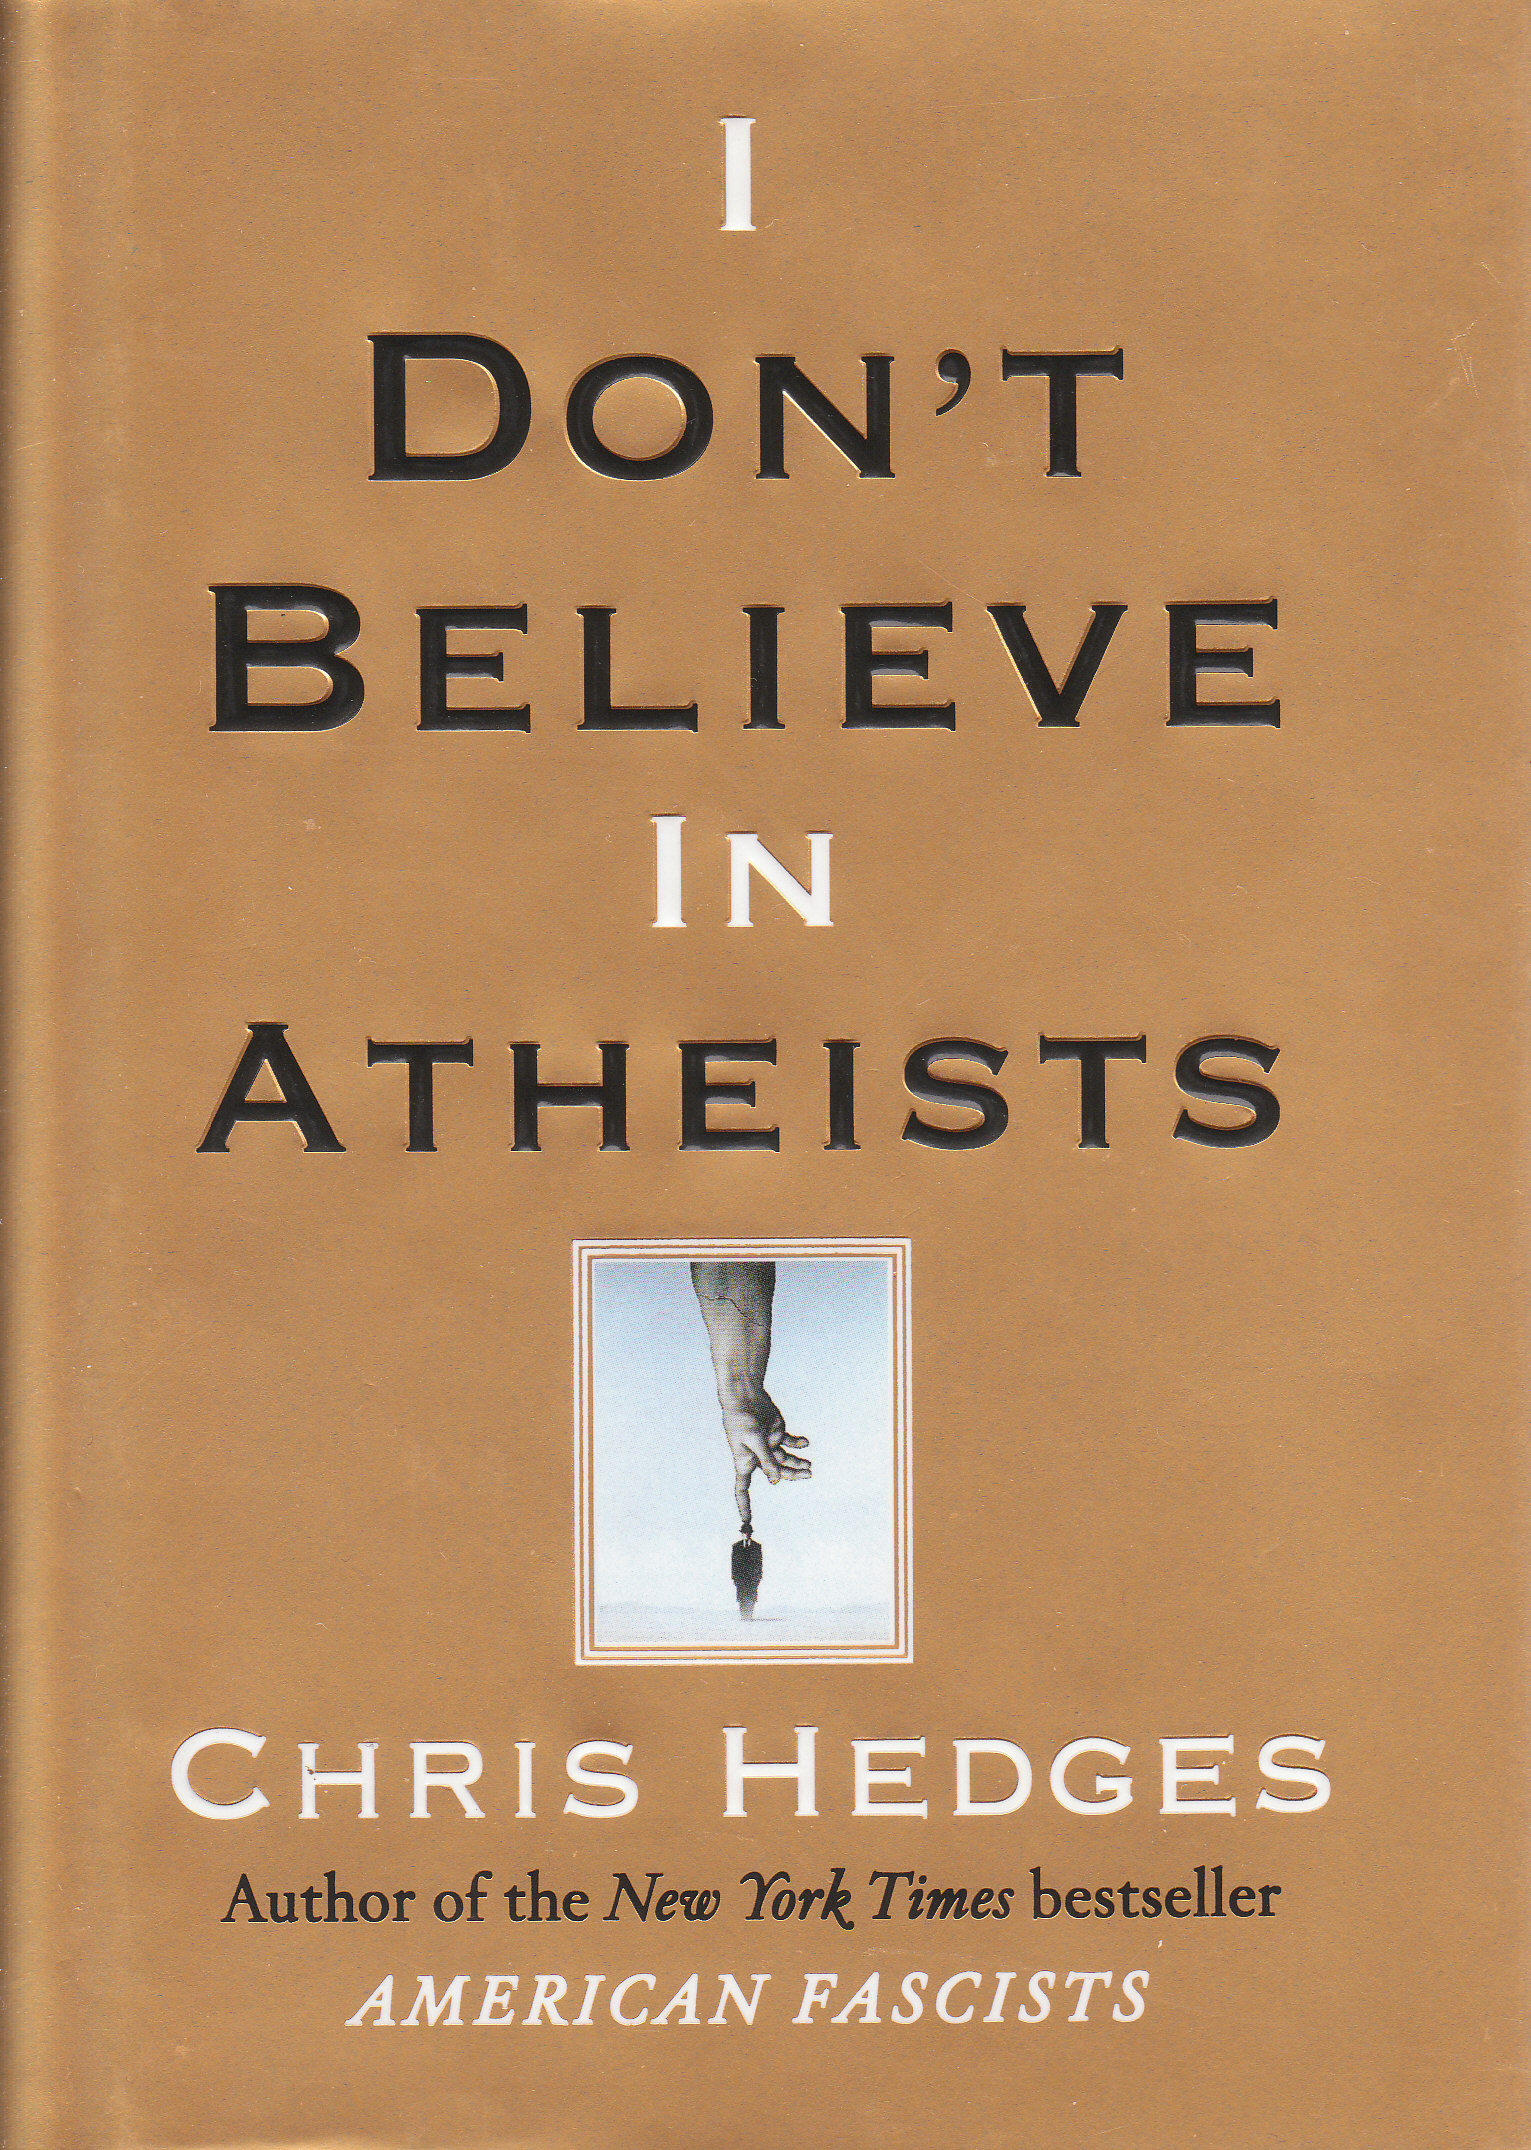 I Don't Believe In Atheists | The Written Word